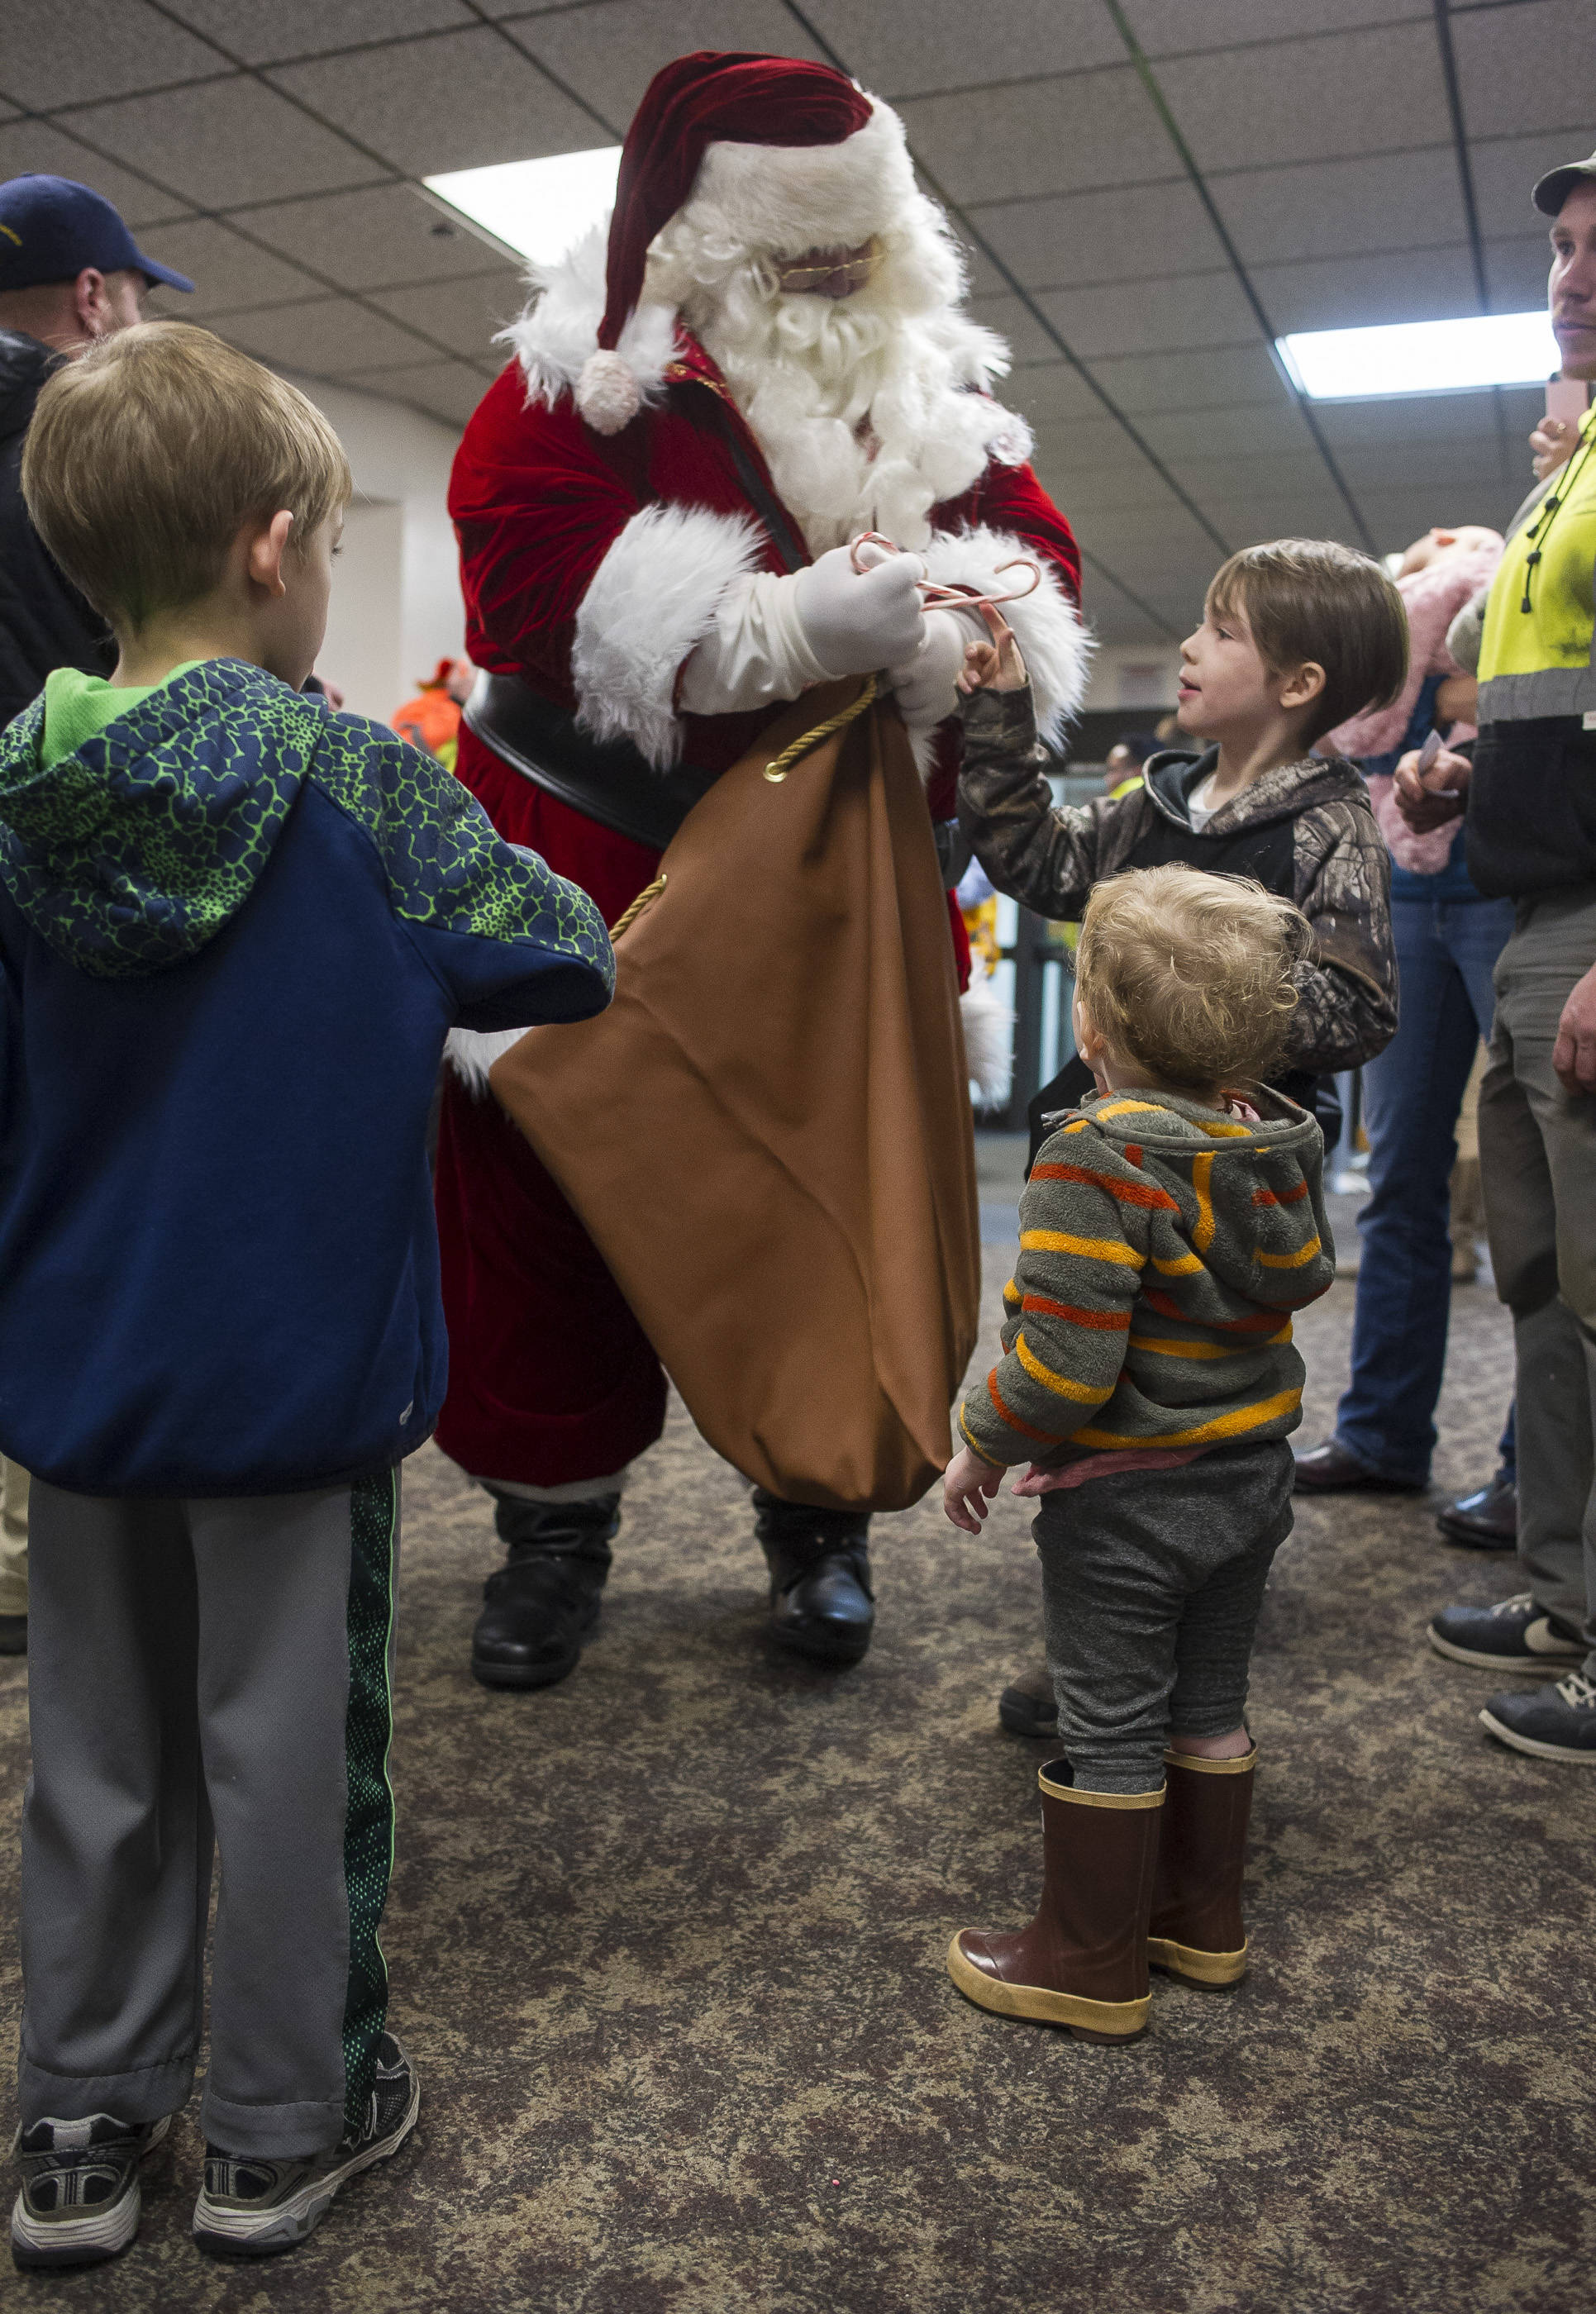 Santa gives out candy canes to children waiting in line for the annual Christmas Lights Flights at the Juneau International Airport on Friday, Dec. 15, 2017. Mendenhall Flying Lions put on the event, which is a fundraiser for the American Children’s Tumor Foundation. Petro Marine Services and Coastal Fuel also support the event. (Michael Penn | Juneau Empire File)